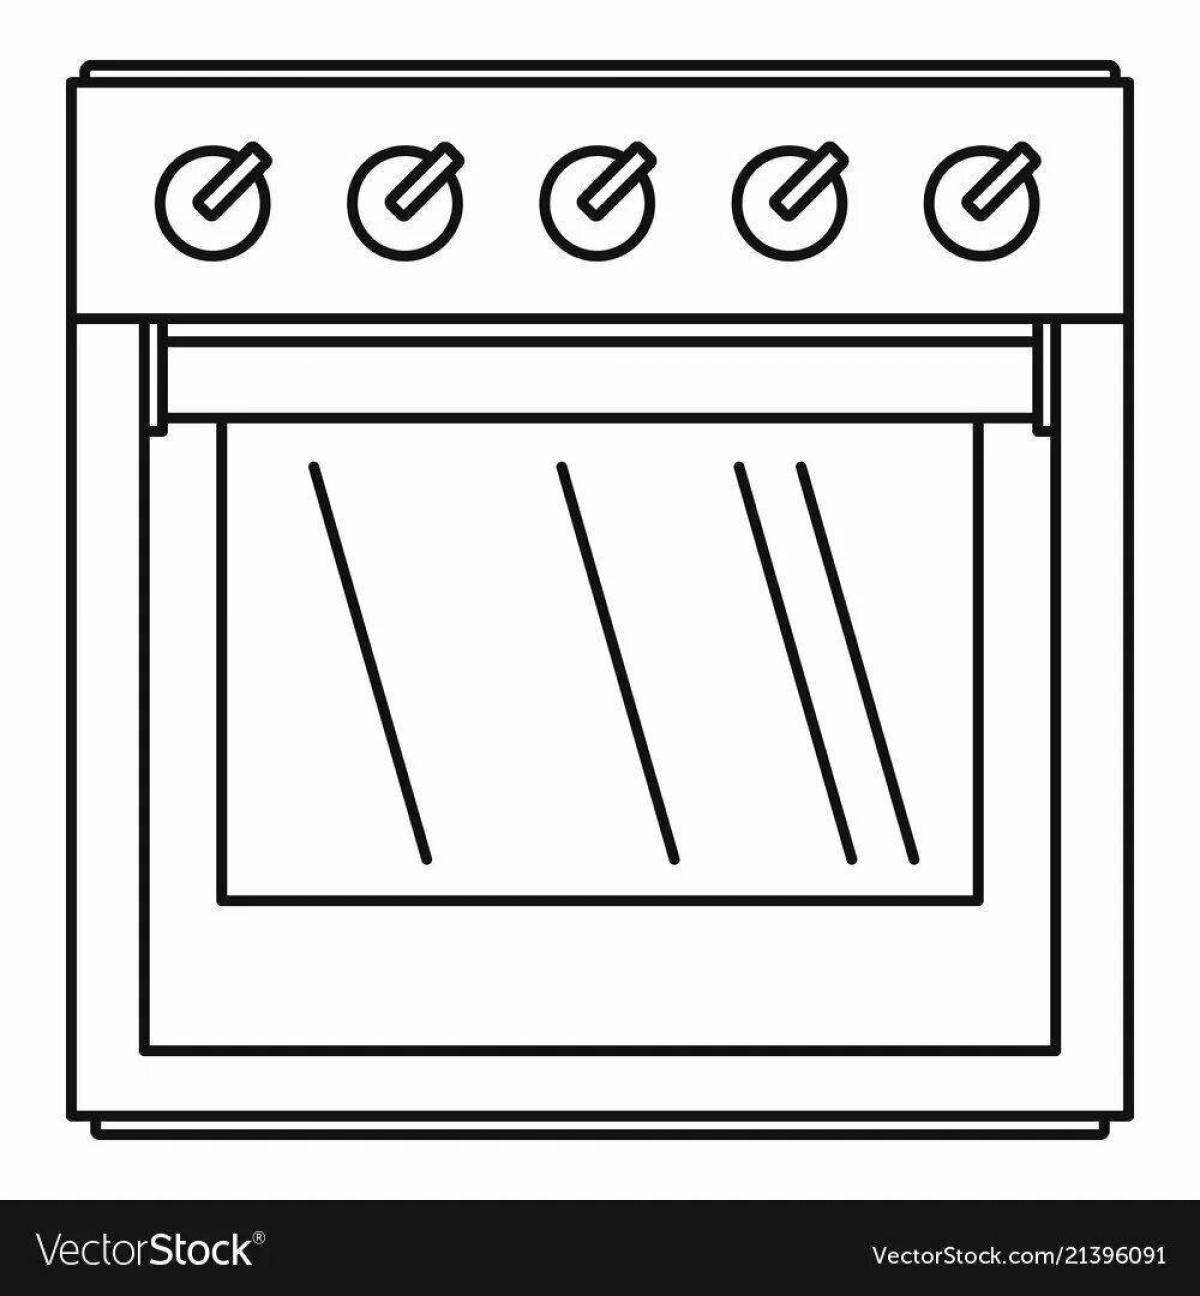 Exciting cooker coloring page